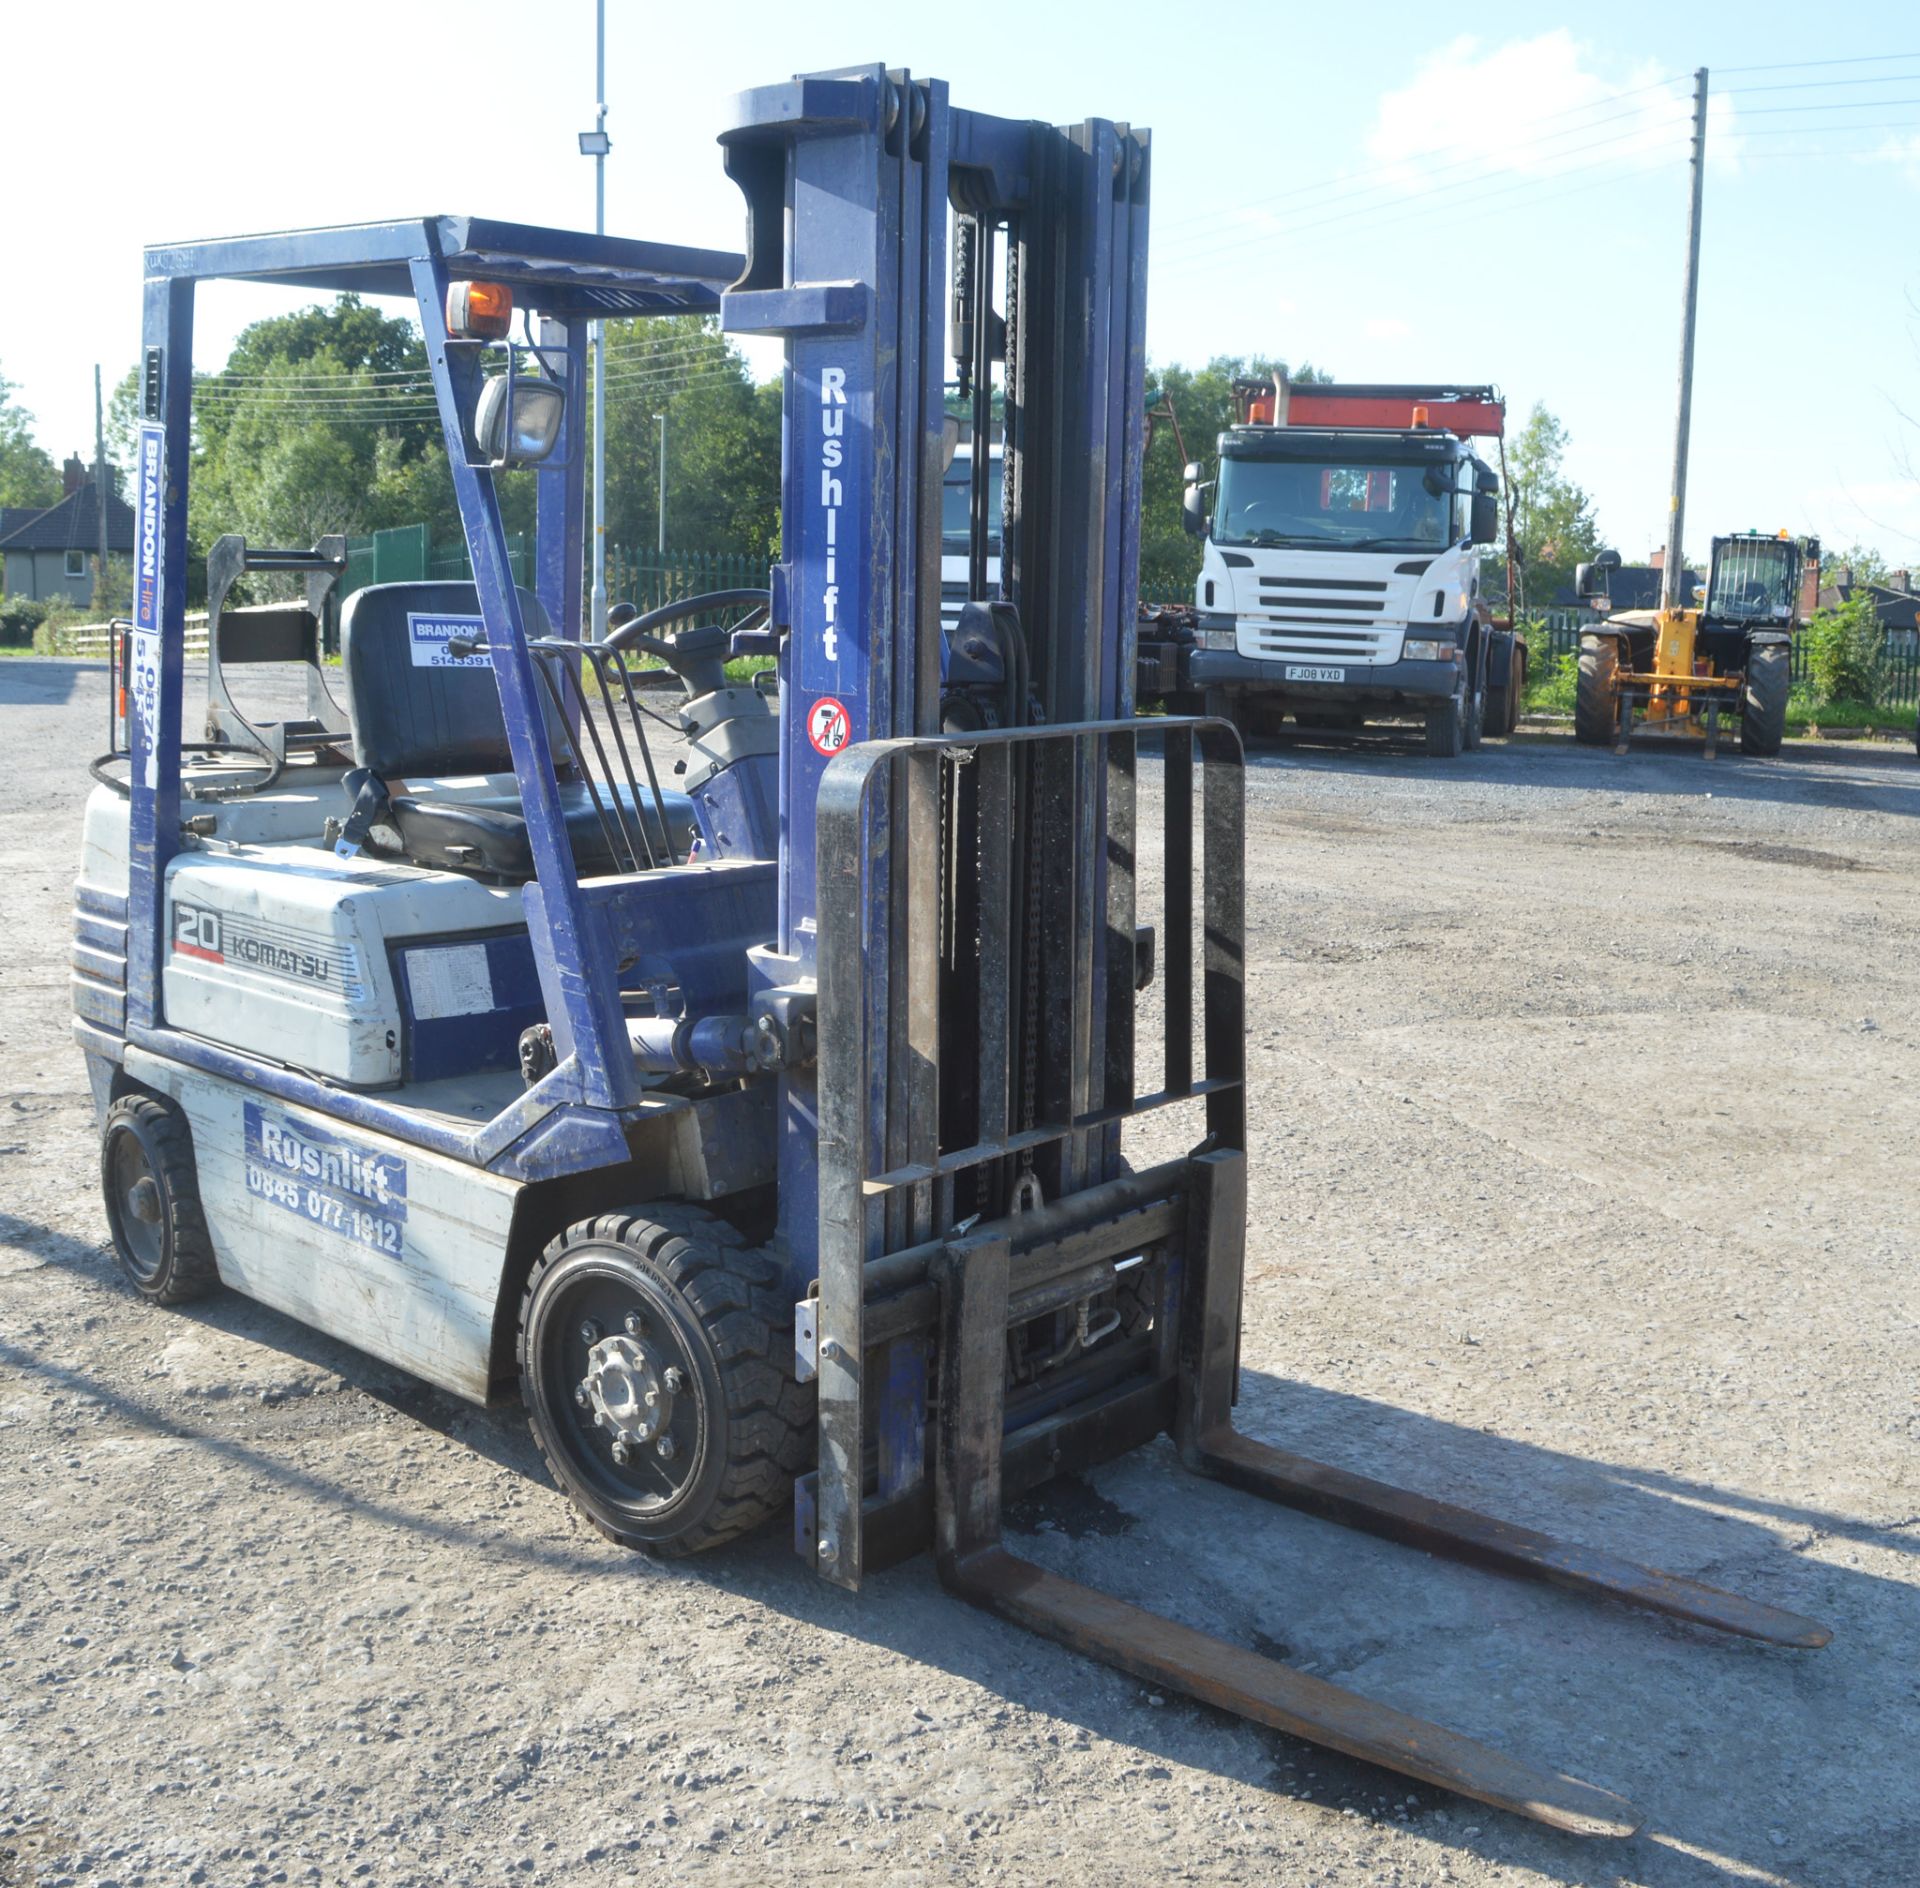 Komatsu FG20ST-11 3.5 tonne gas powered fork lift truck  Year: 1995 S/N: 406543A  Recorded hours: - Image 2 of 7